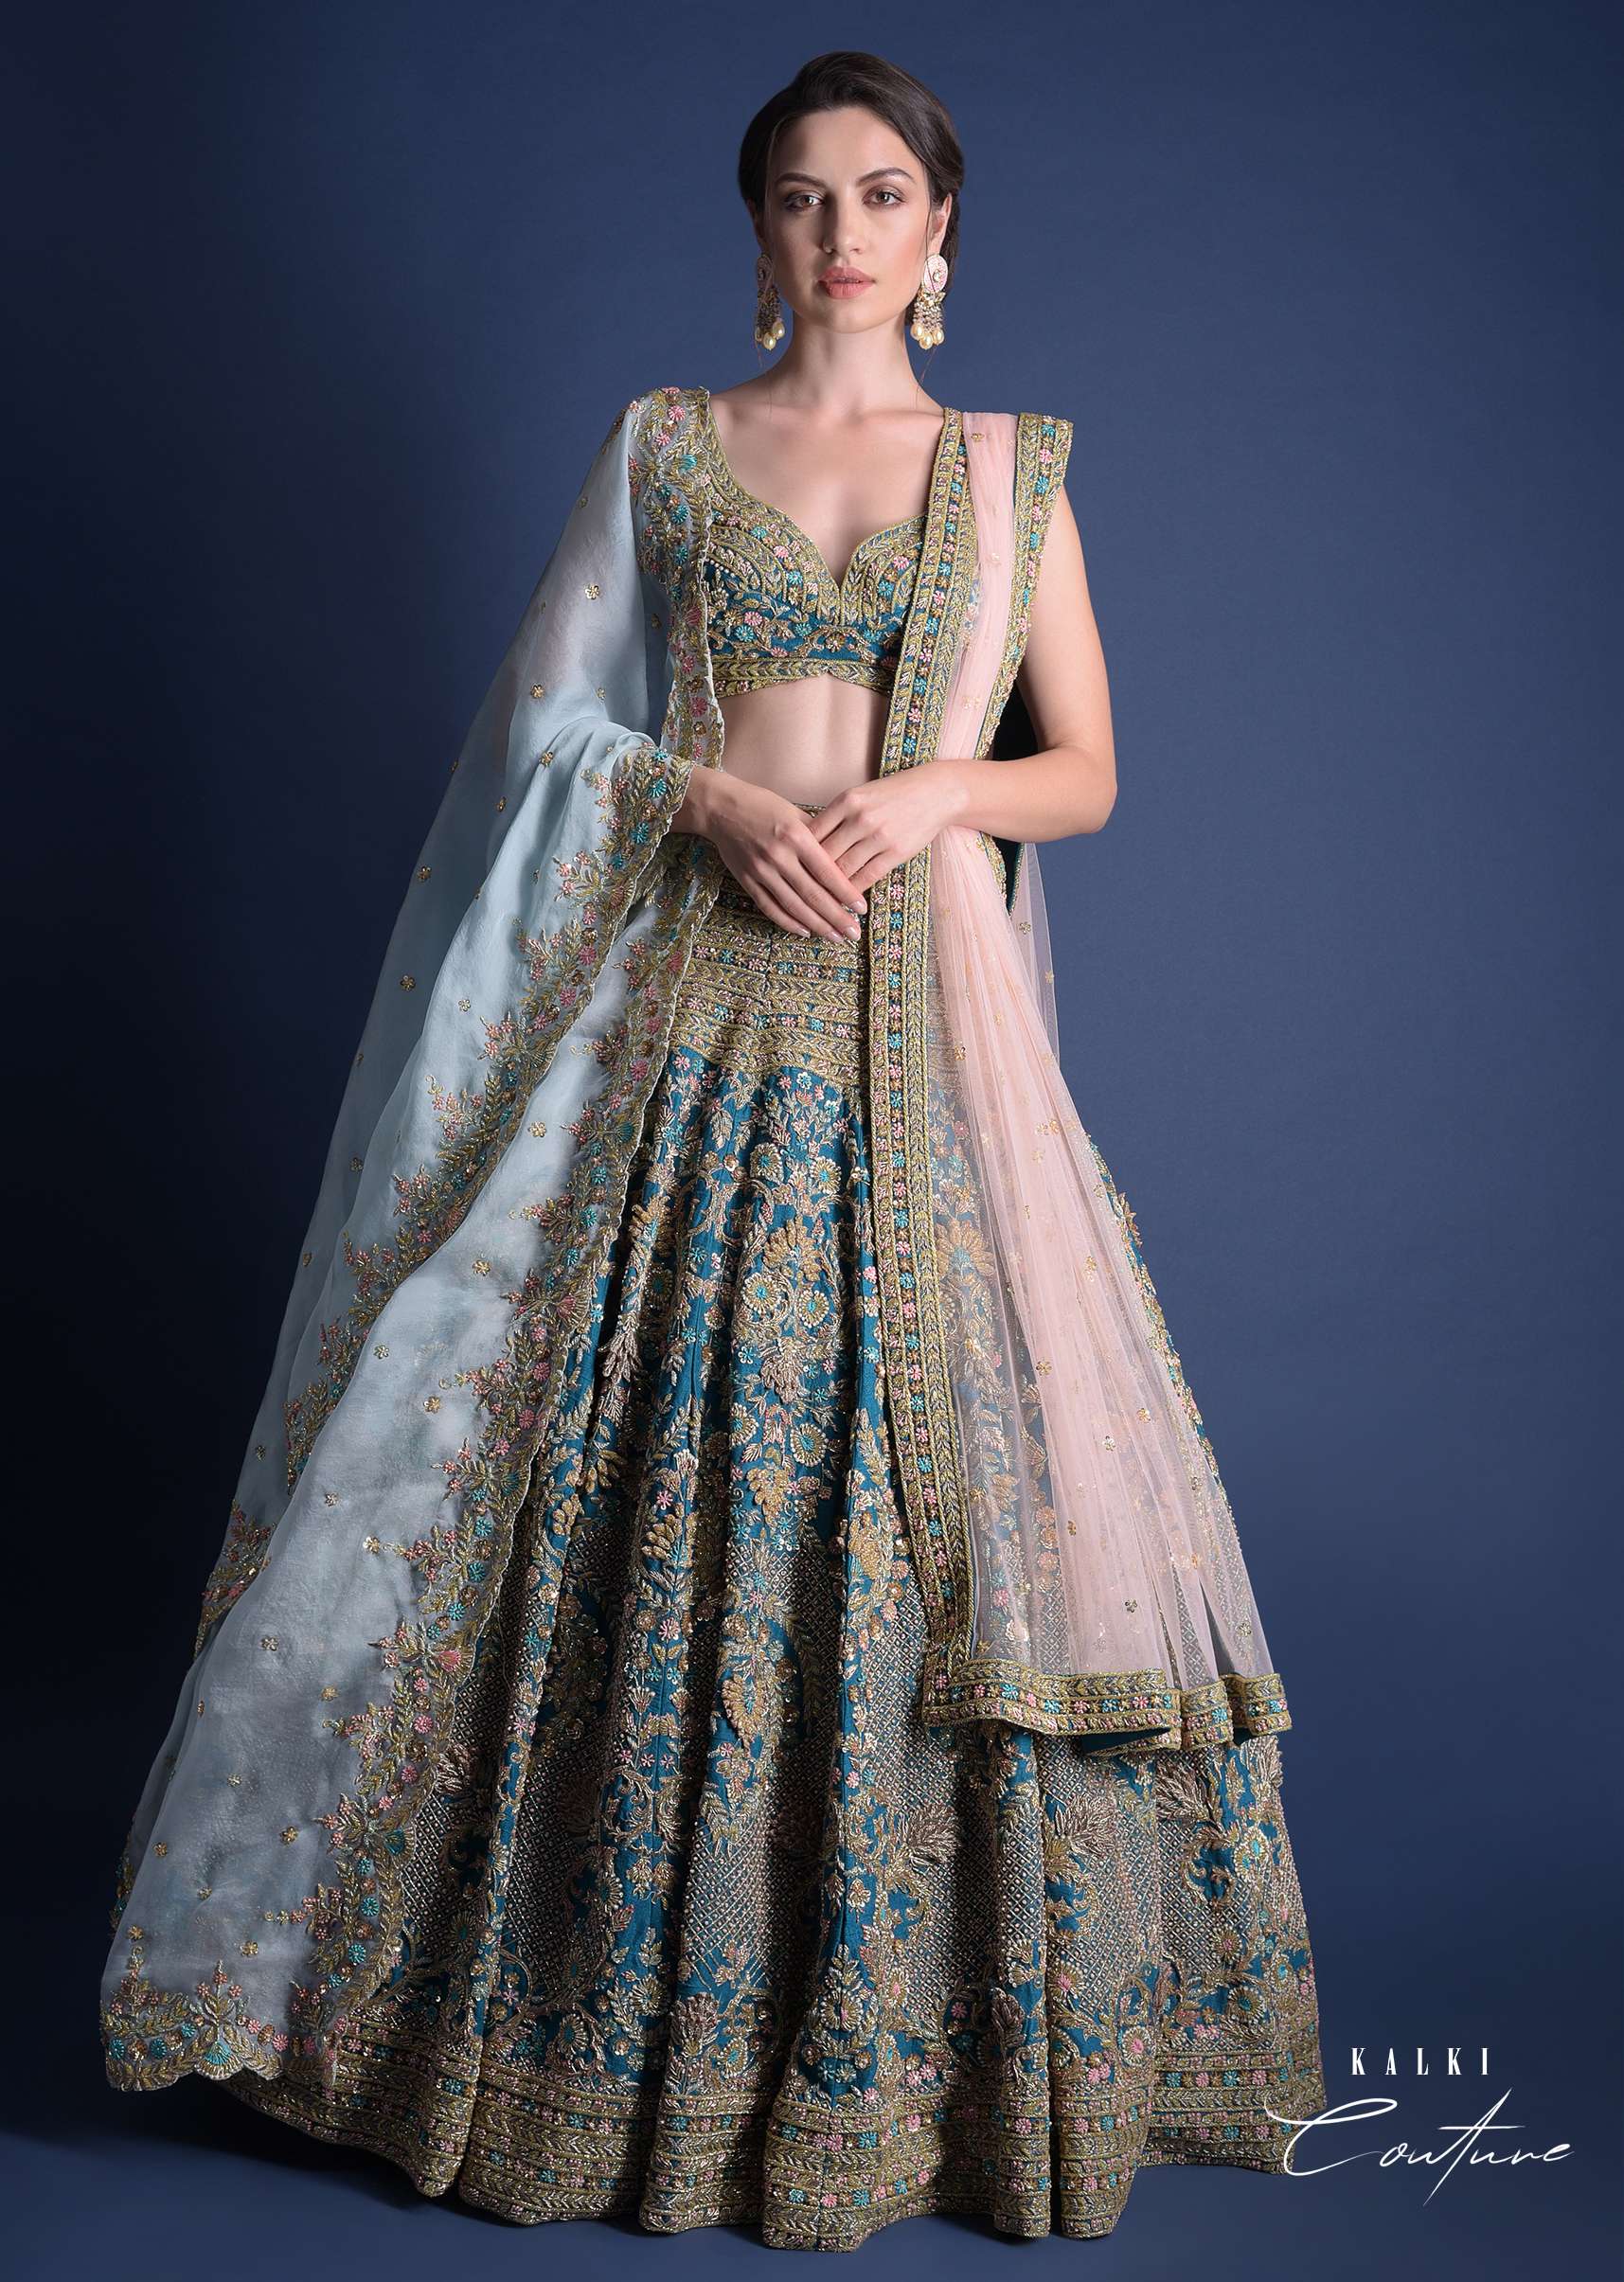 Seaside Blue Lehenga Choli With Heavy Hand Embellished Moroccan And Floral Pattern